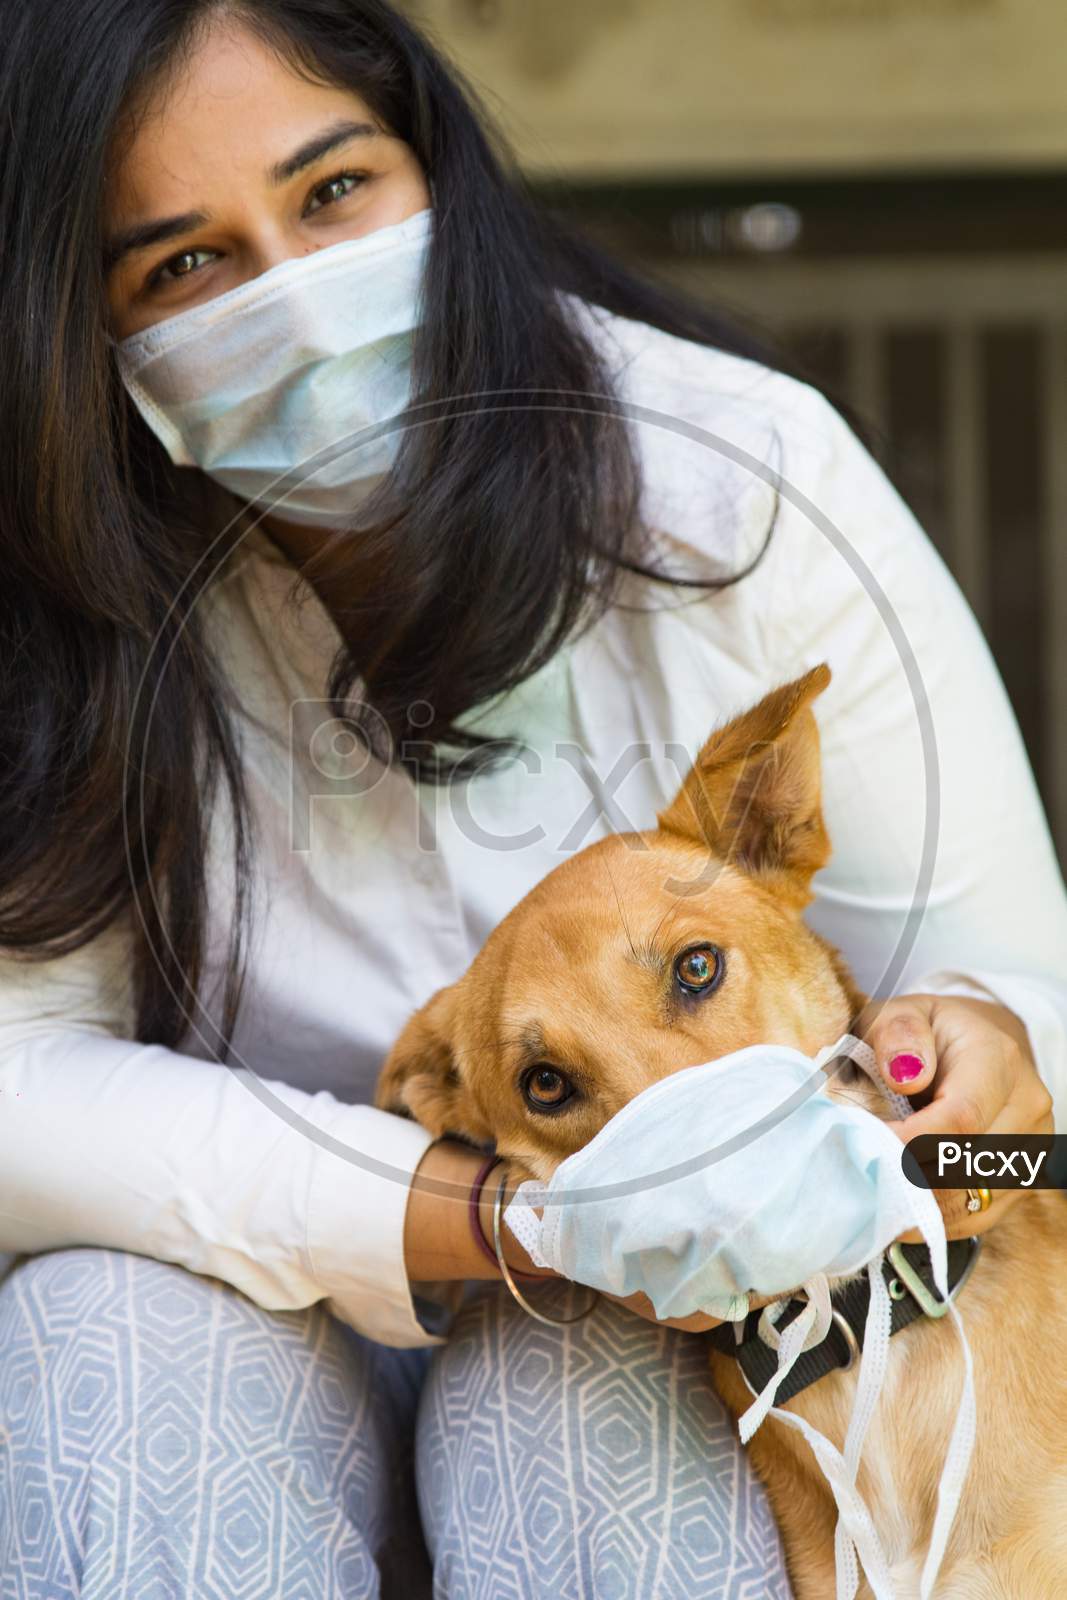 An Indian Health Worker And Her Pet Dog Wearing A Mask During Corona Virus Pandemic and Spreading The Awareness